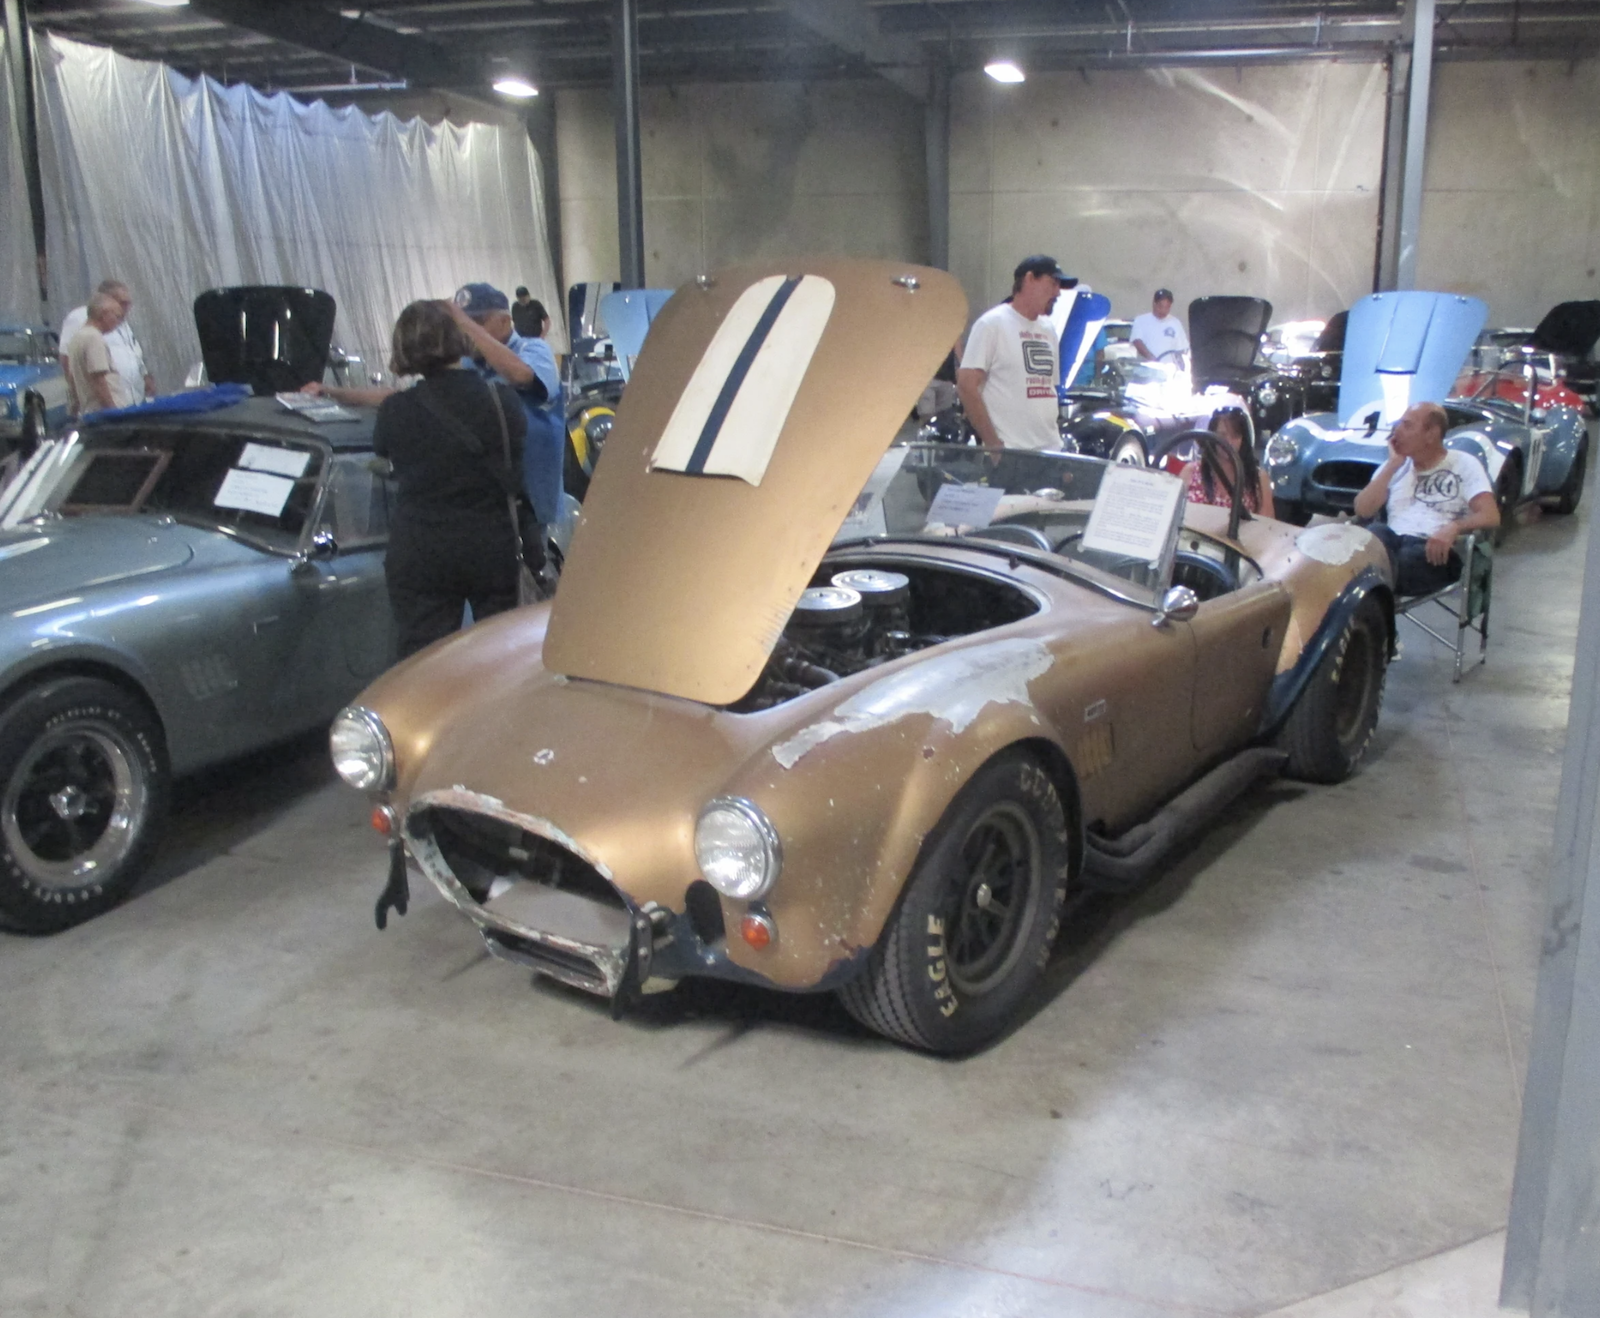 Event Report: The Shelby American Club Los Angeles Car Show